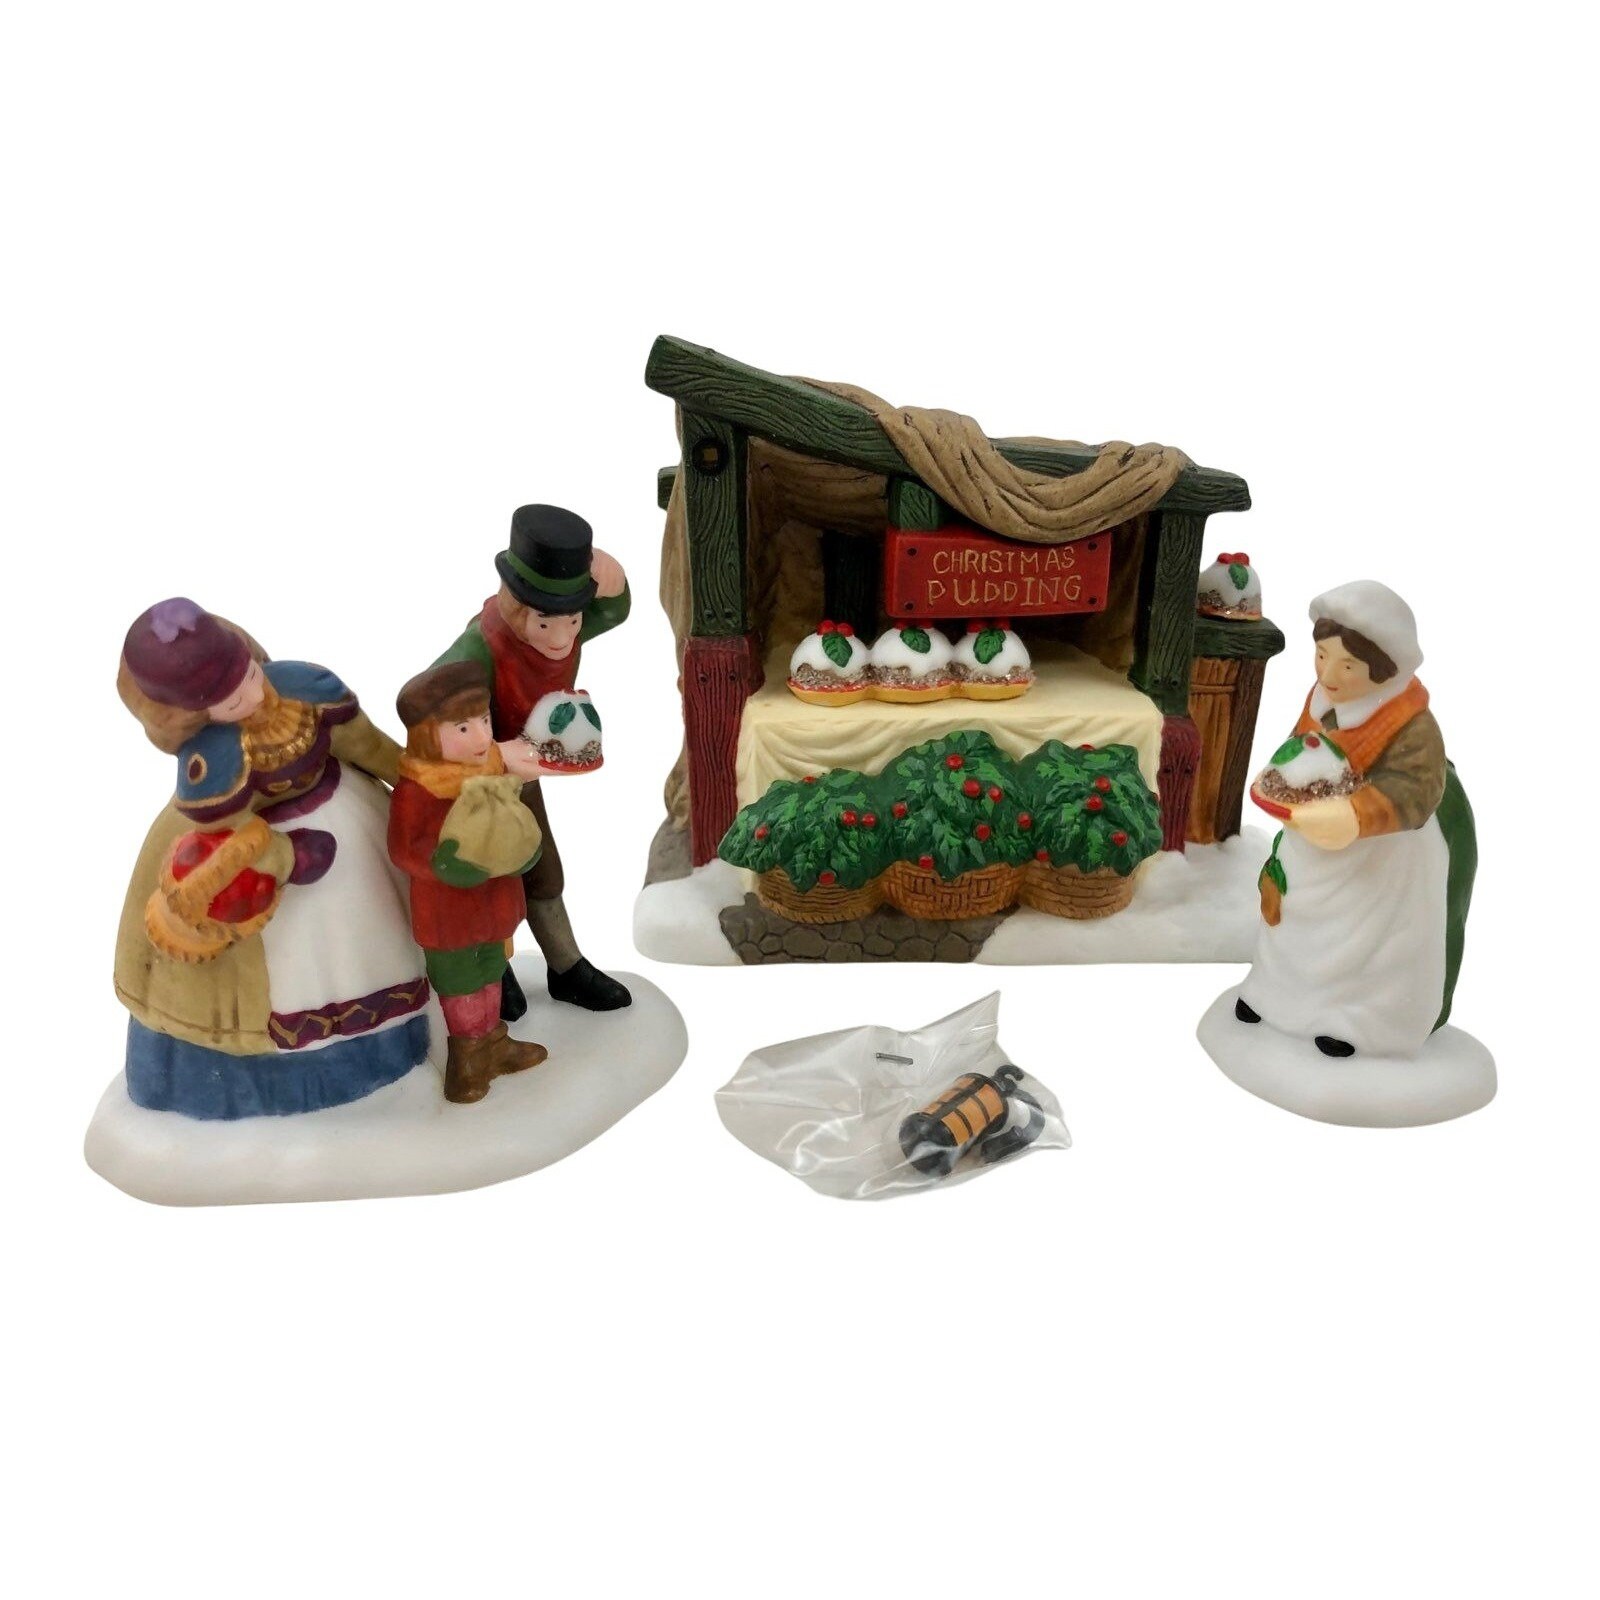 Department 56 Christmas Pudding Costermonger 58408 Dickens Village Figures 1997